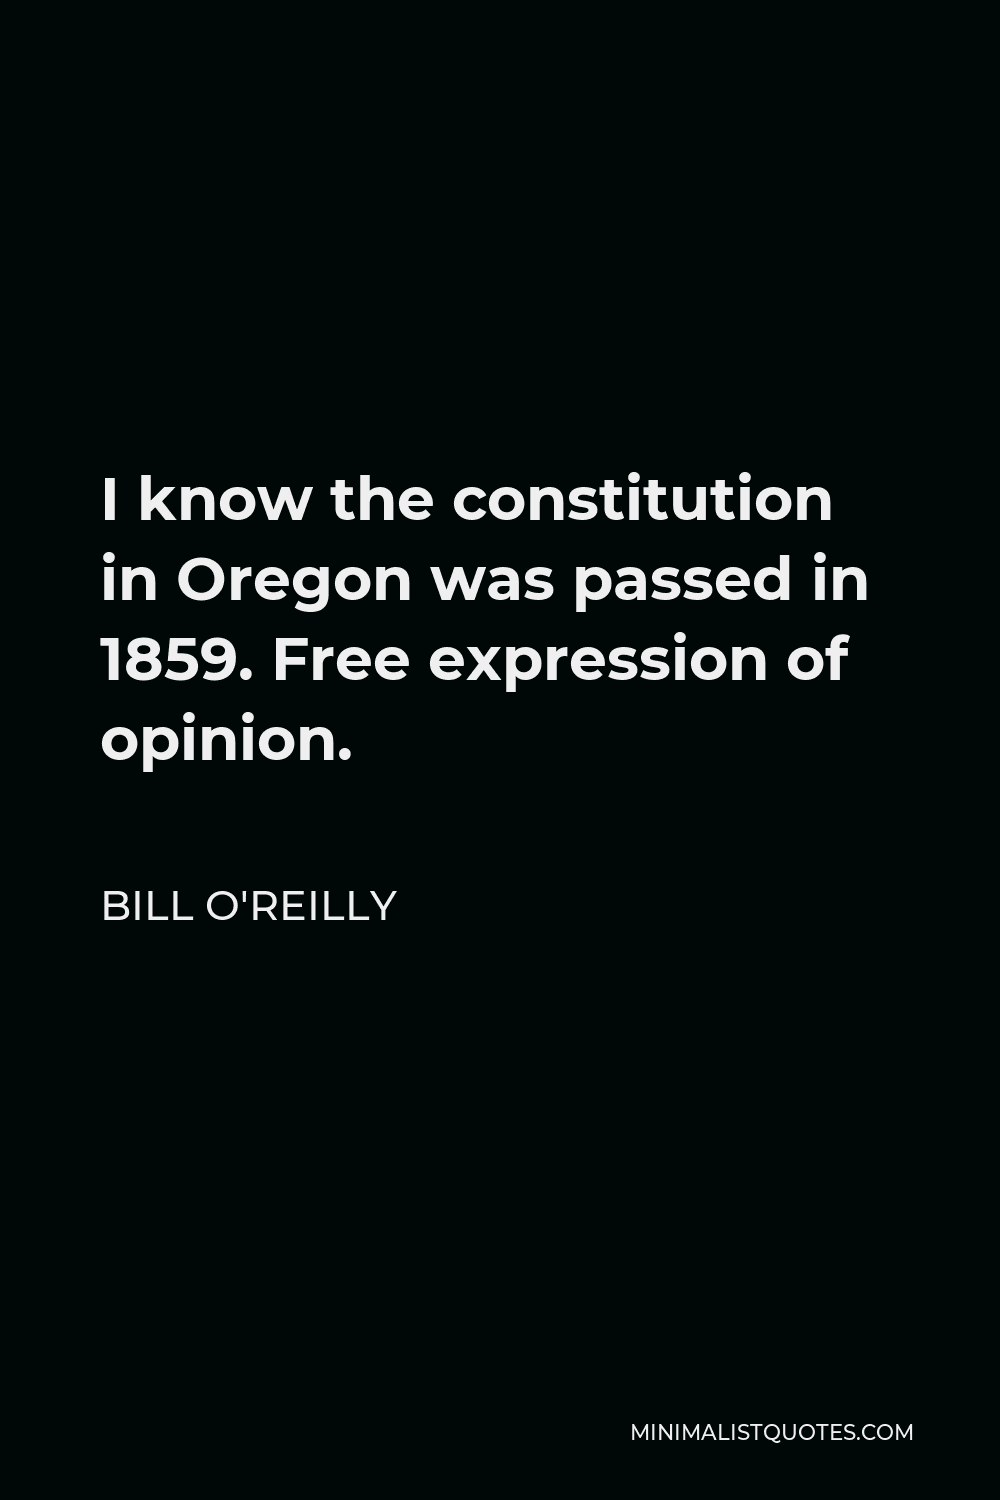 Bill O'Reilly Quote - I know the constitution in Oregon was passed in 1859. Free expression of opinion.